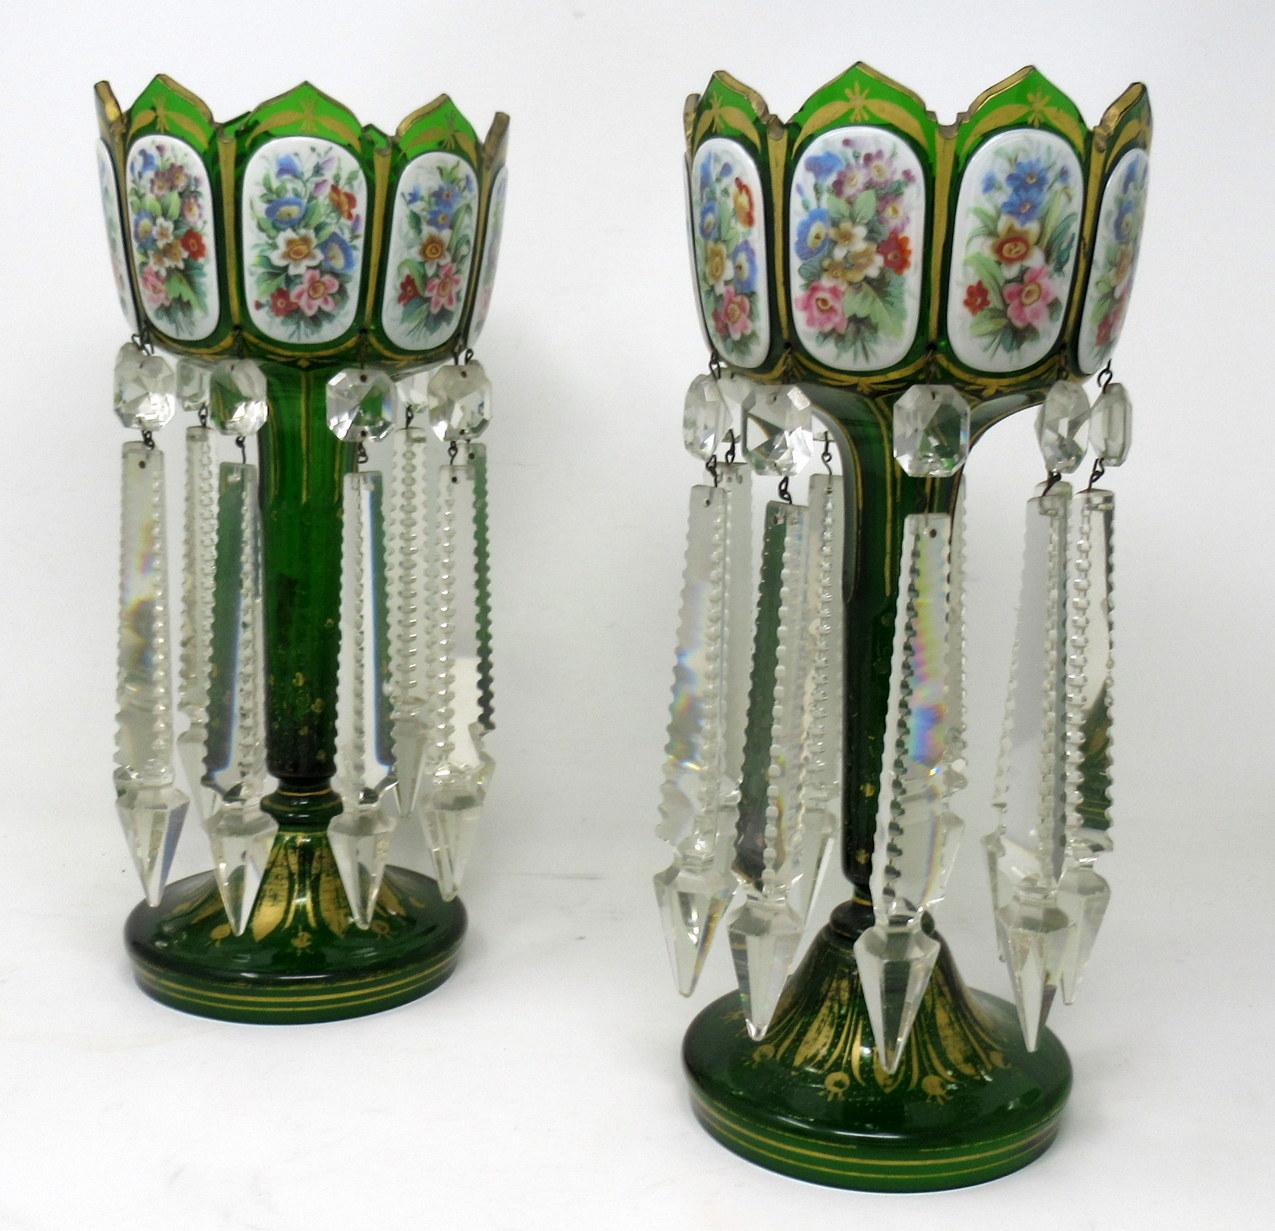 A stylish example of a fine pair of bohemian emerald green ground gilt heightened white enamel hand cut full lead crystal lustres of outstanding quality and of good size proportions. Third quarter of the nineteenth century, possibly earlier.

Each